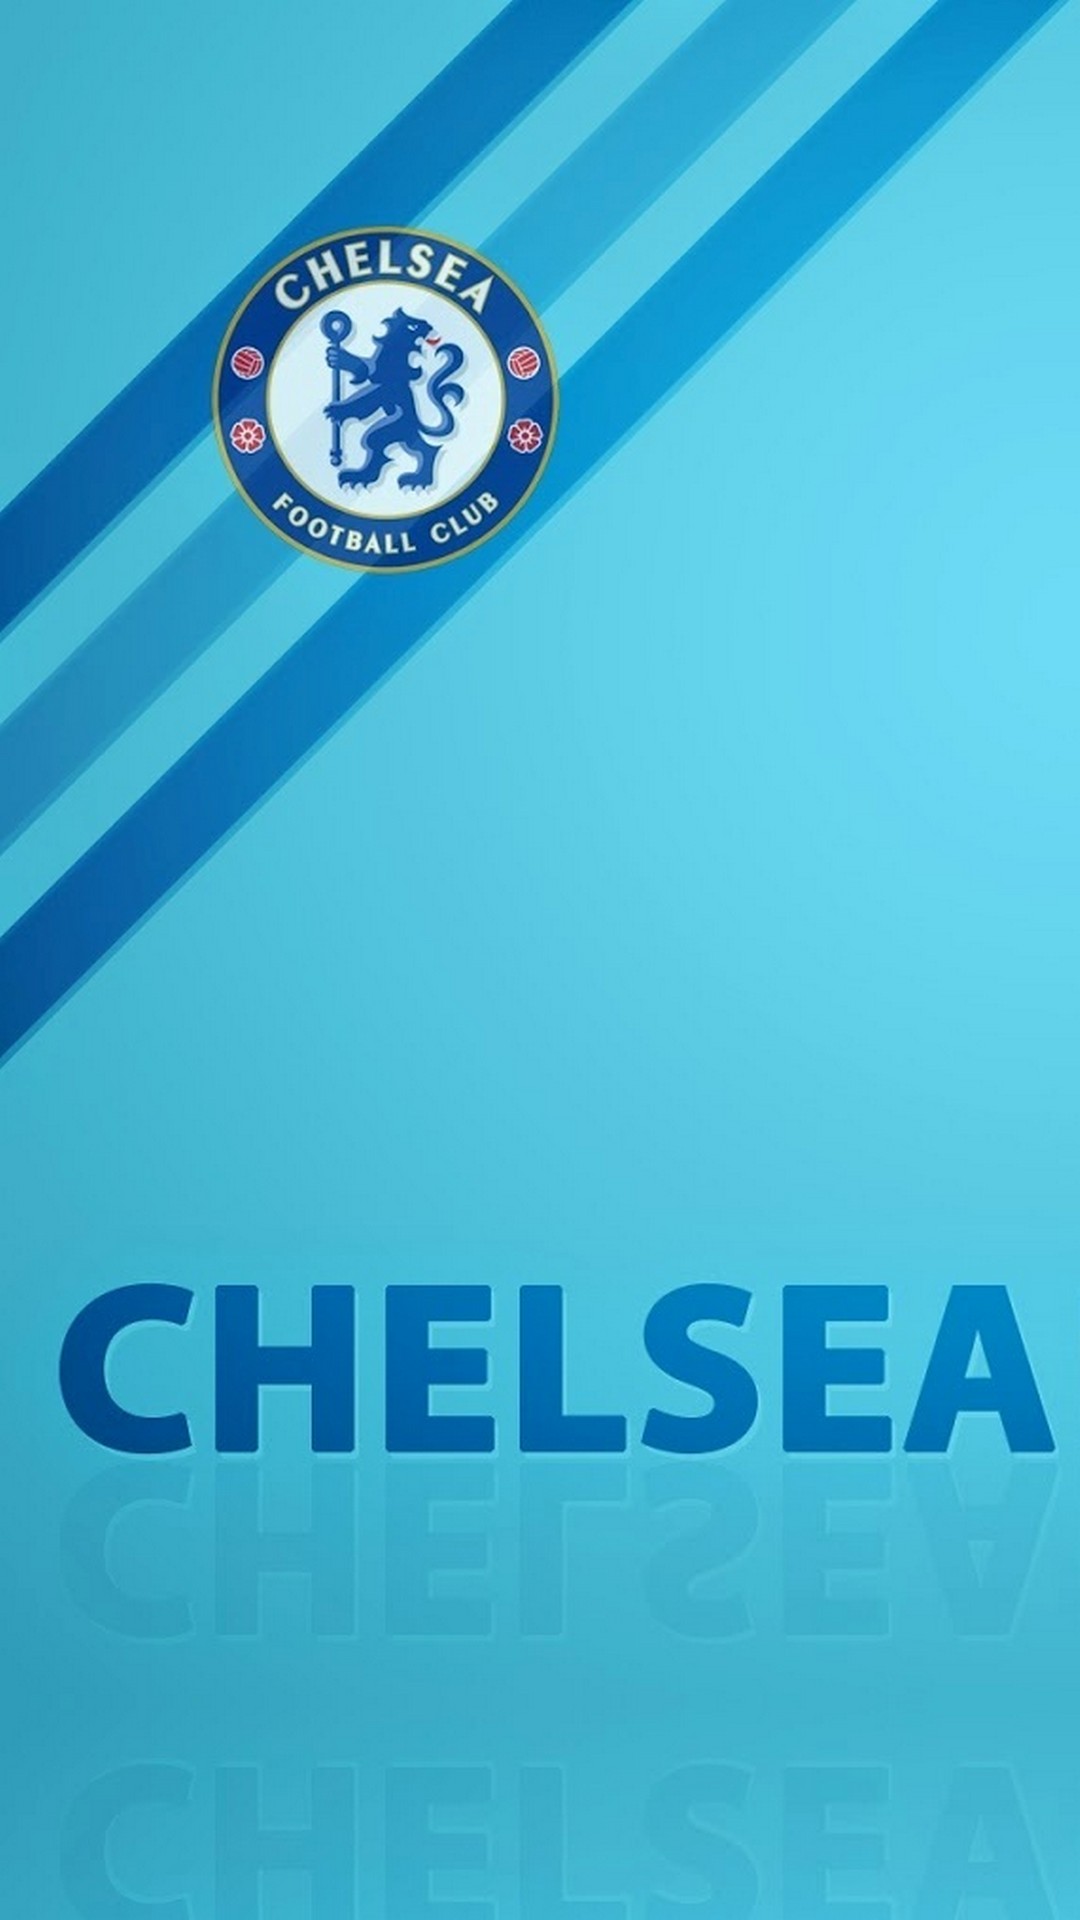 Chelsea Fc Hd Logo Wallpapers For Iphone And Android Mobiles Chelsea Core